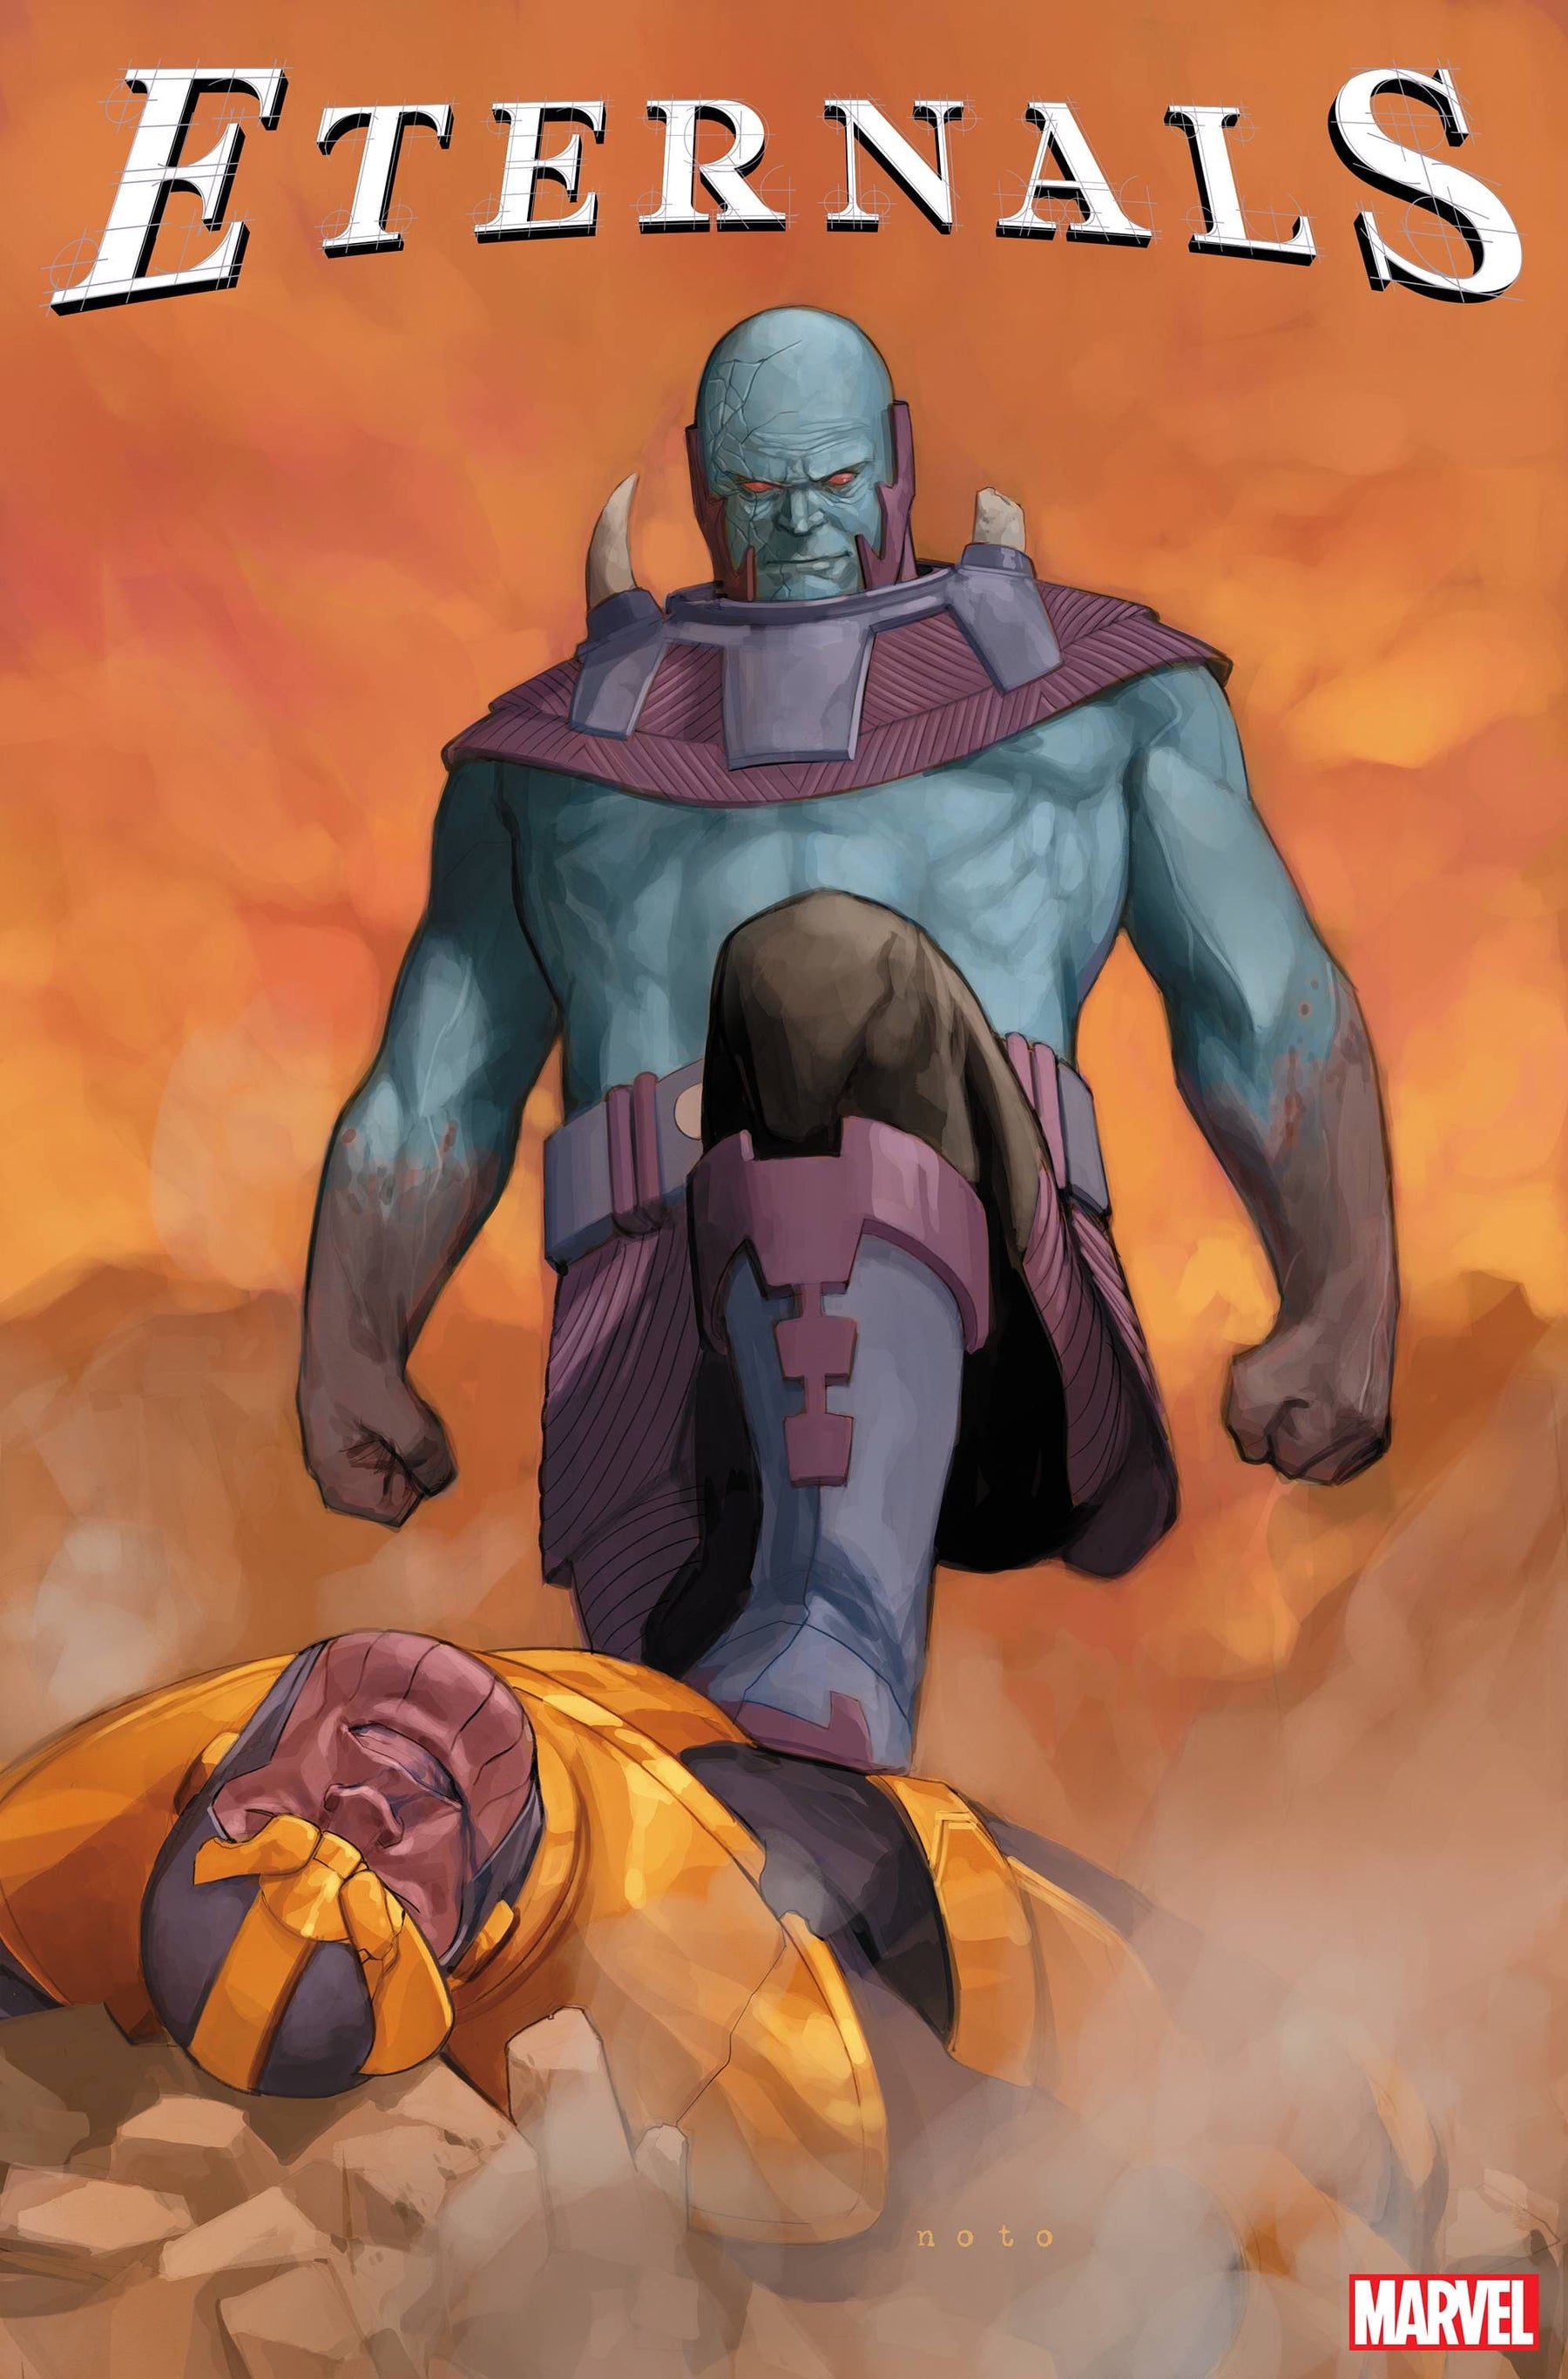 ETERNALS THE HERETIC #1 NOTO COVER